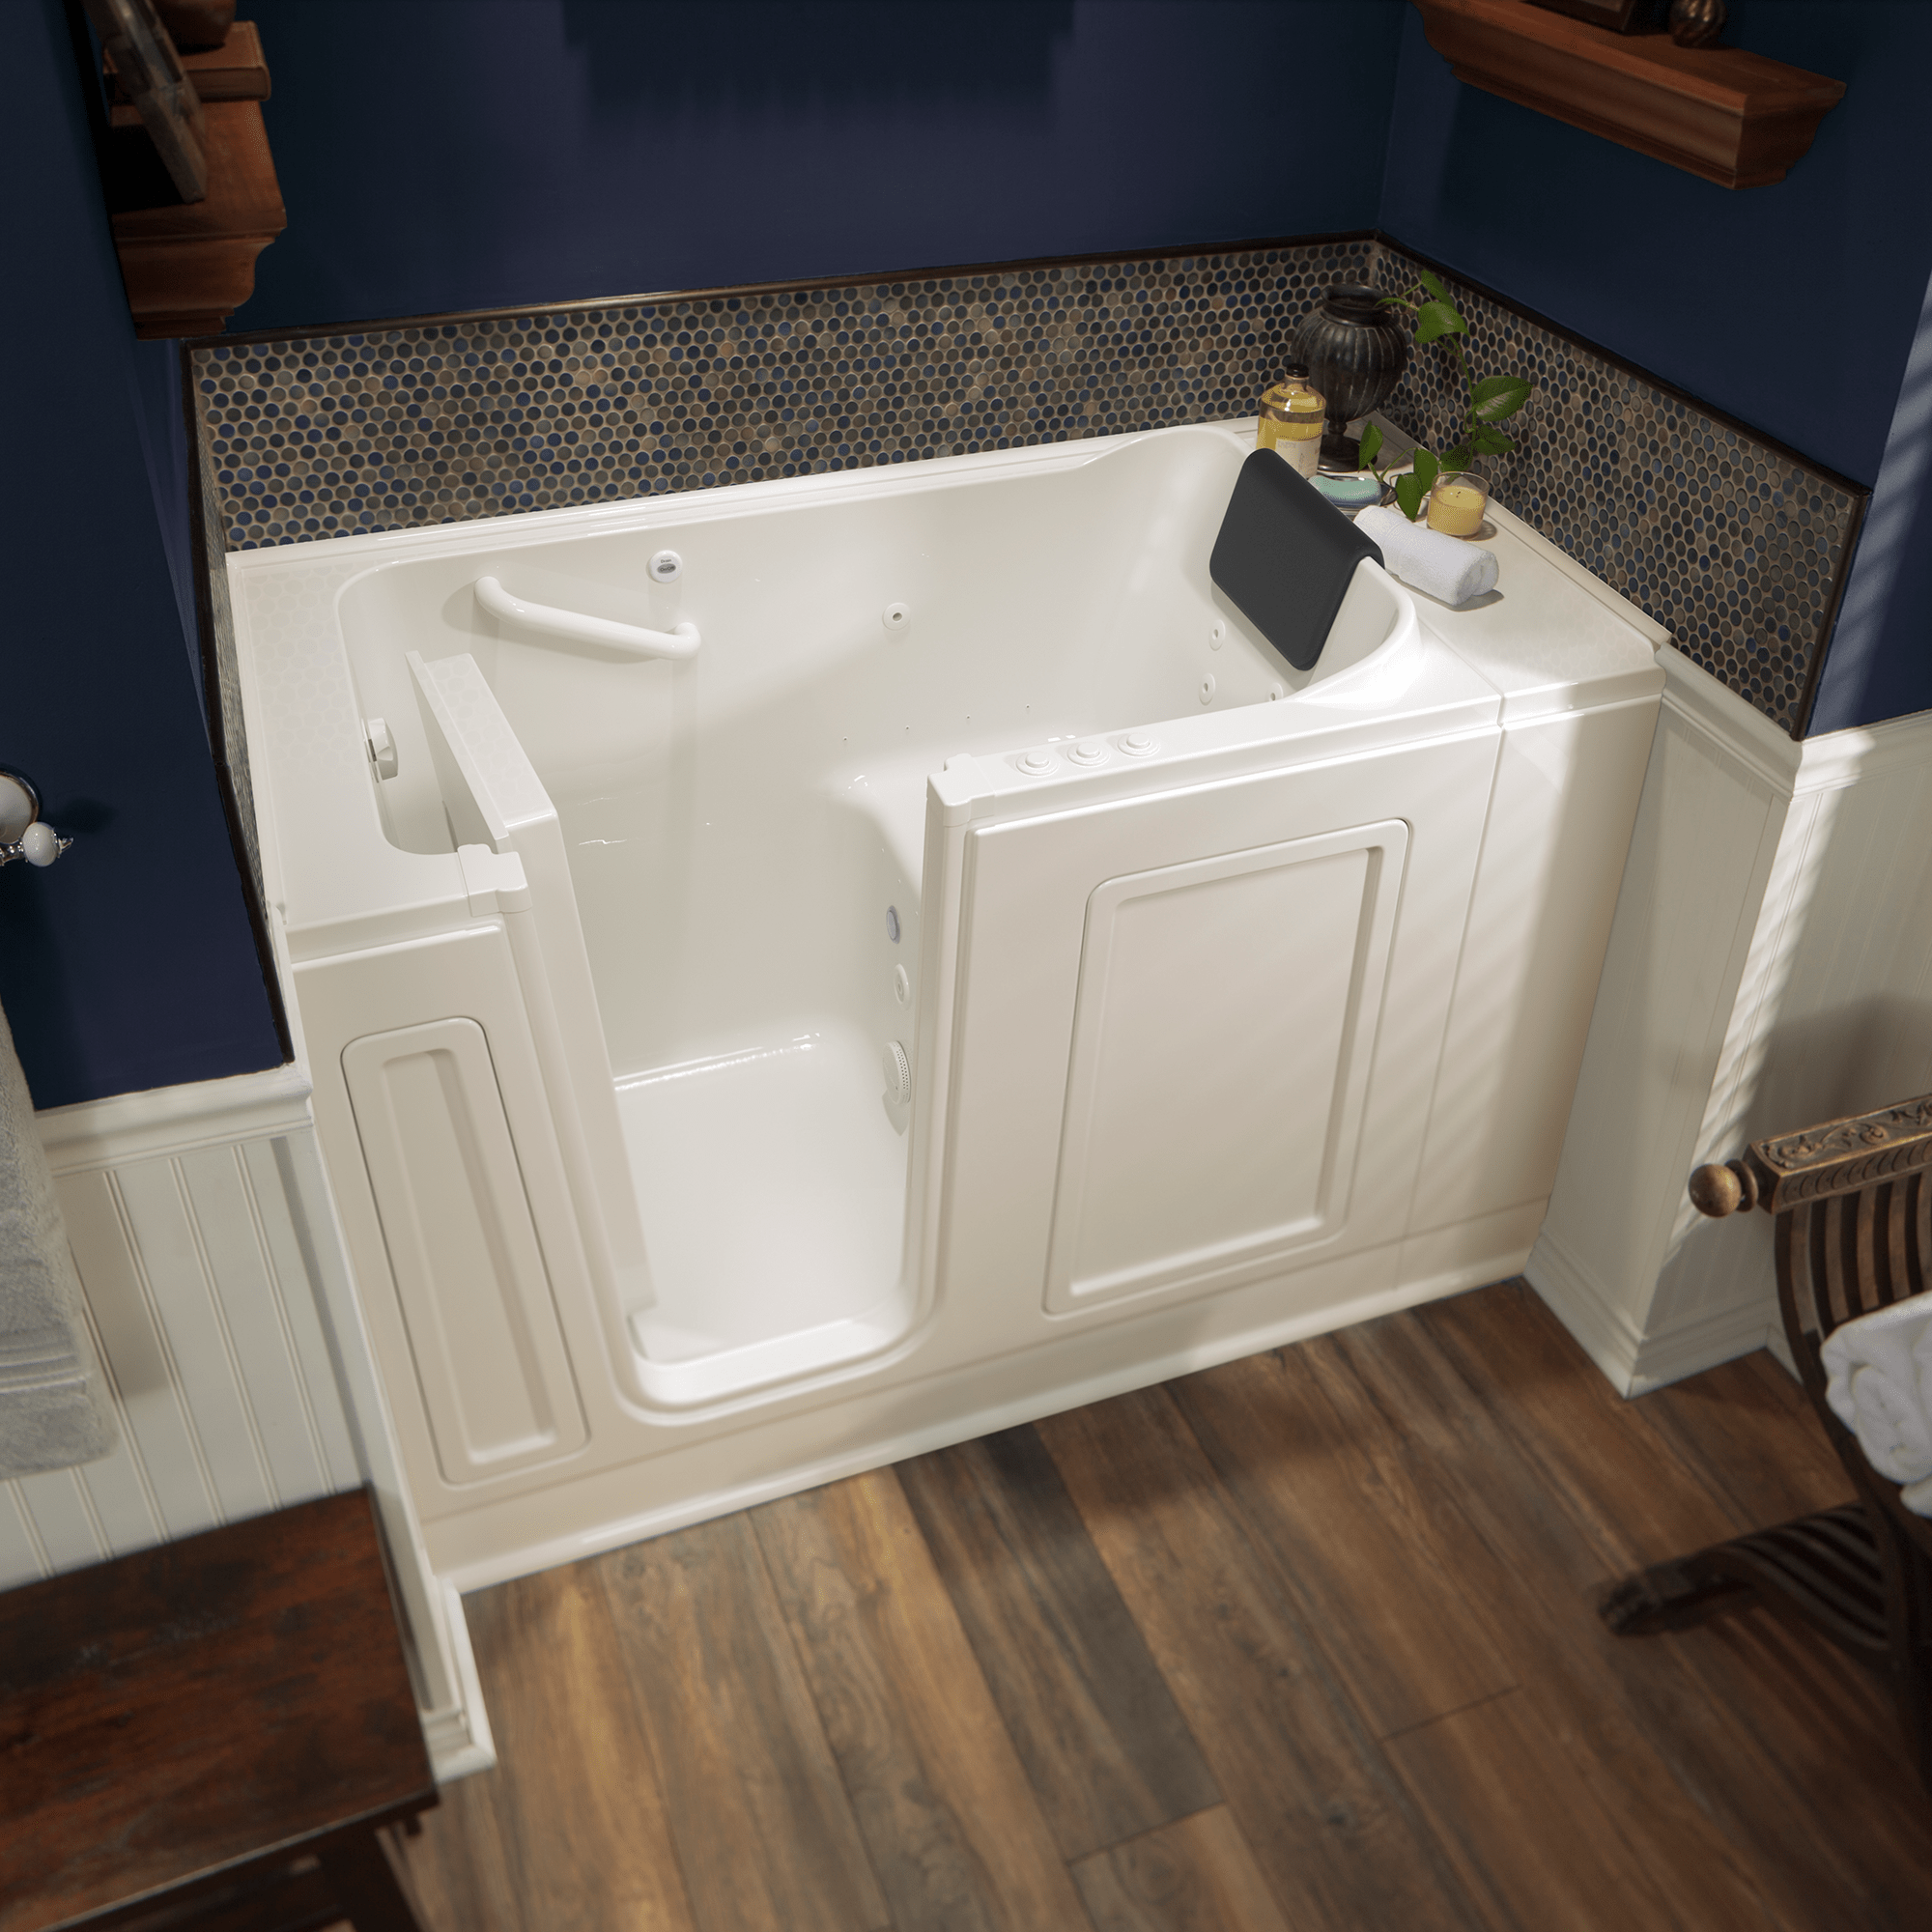 Acrylic Luxury Series 30 x 51 -Inch Walk-in Tub With Combination Air Spa and Whirlpool Systems - Left-Hand Drain